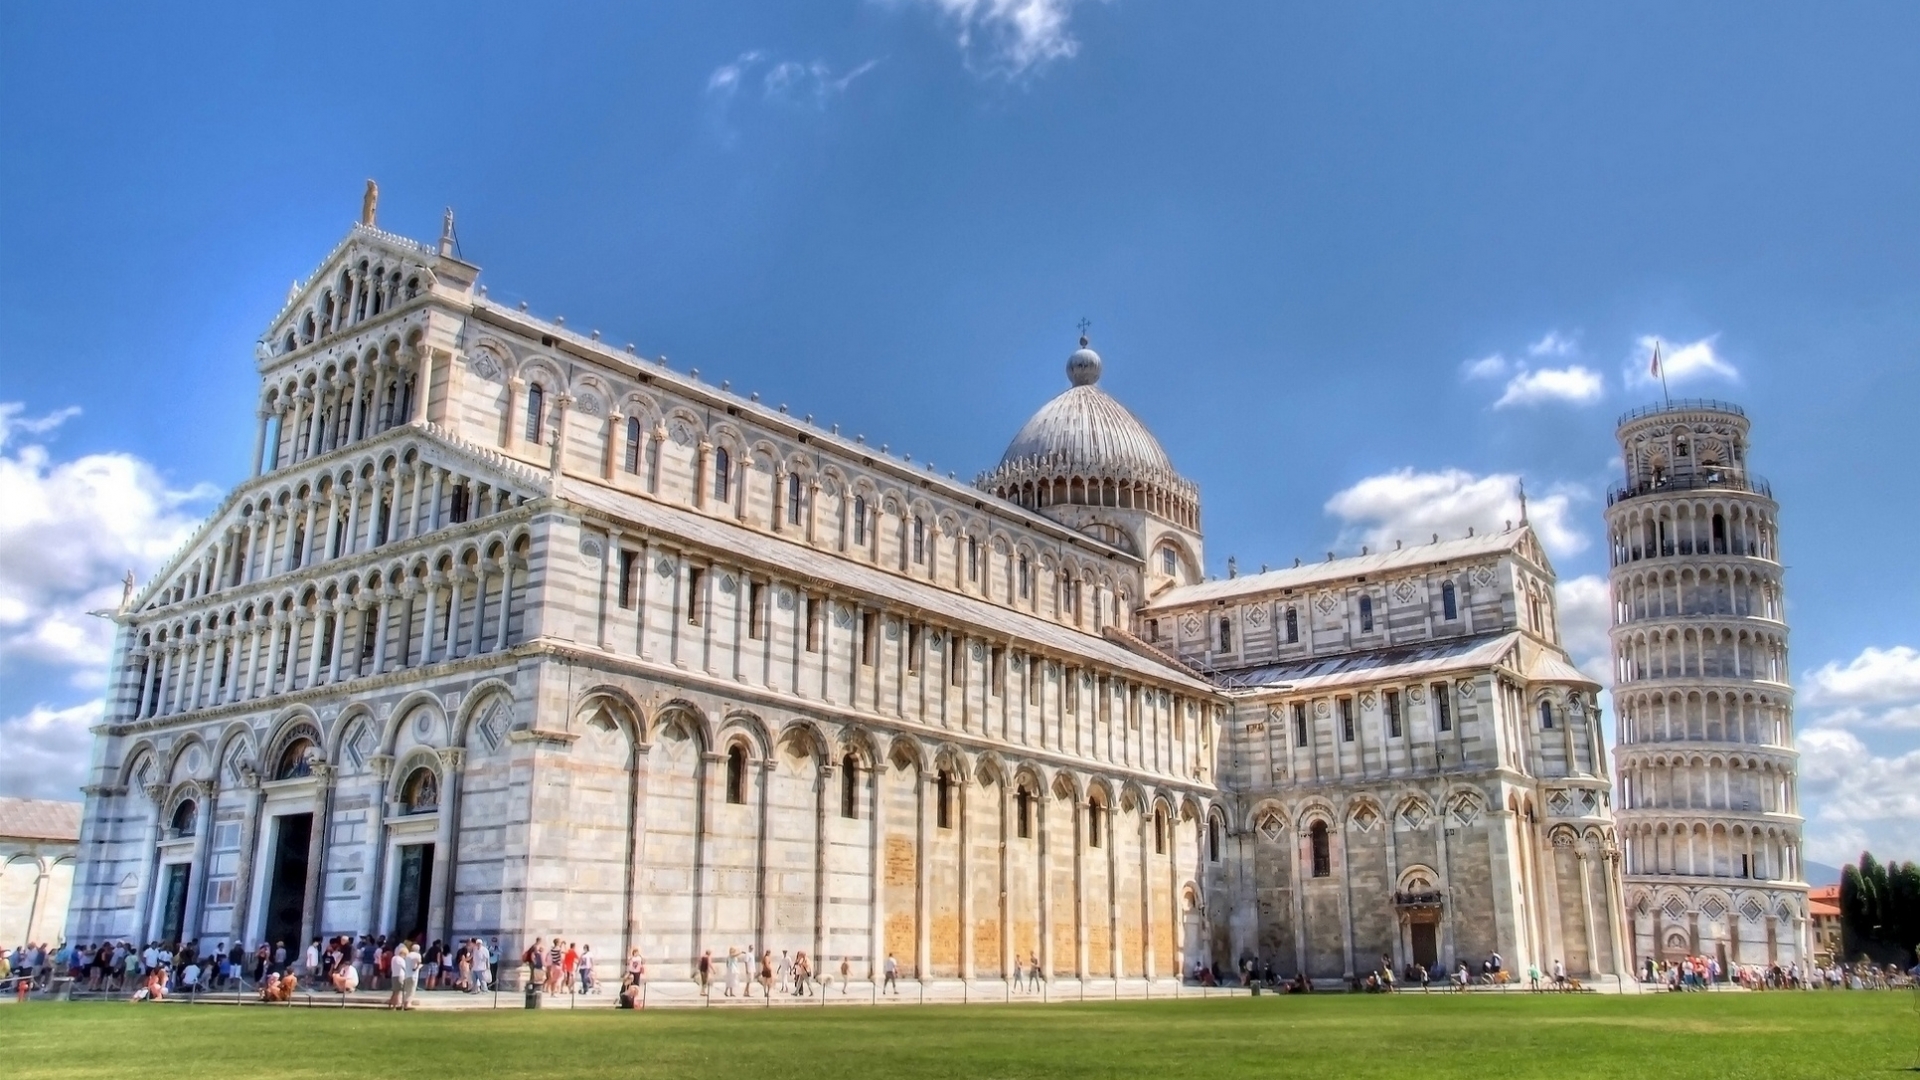 Cathedral And Leaning Tower Of Pisa HDr Jpg